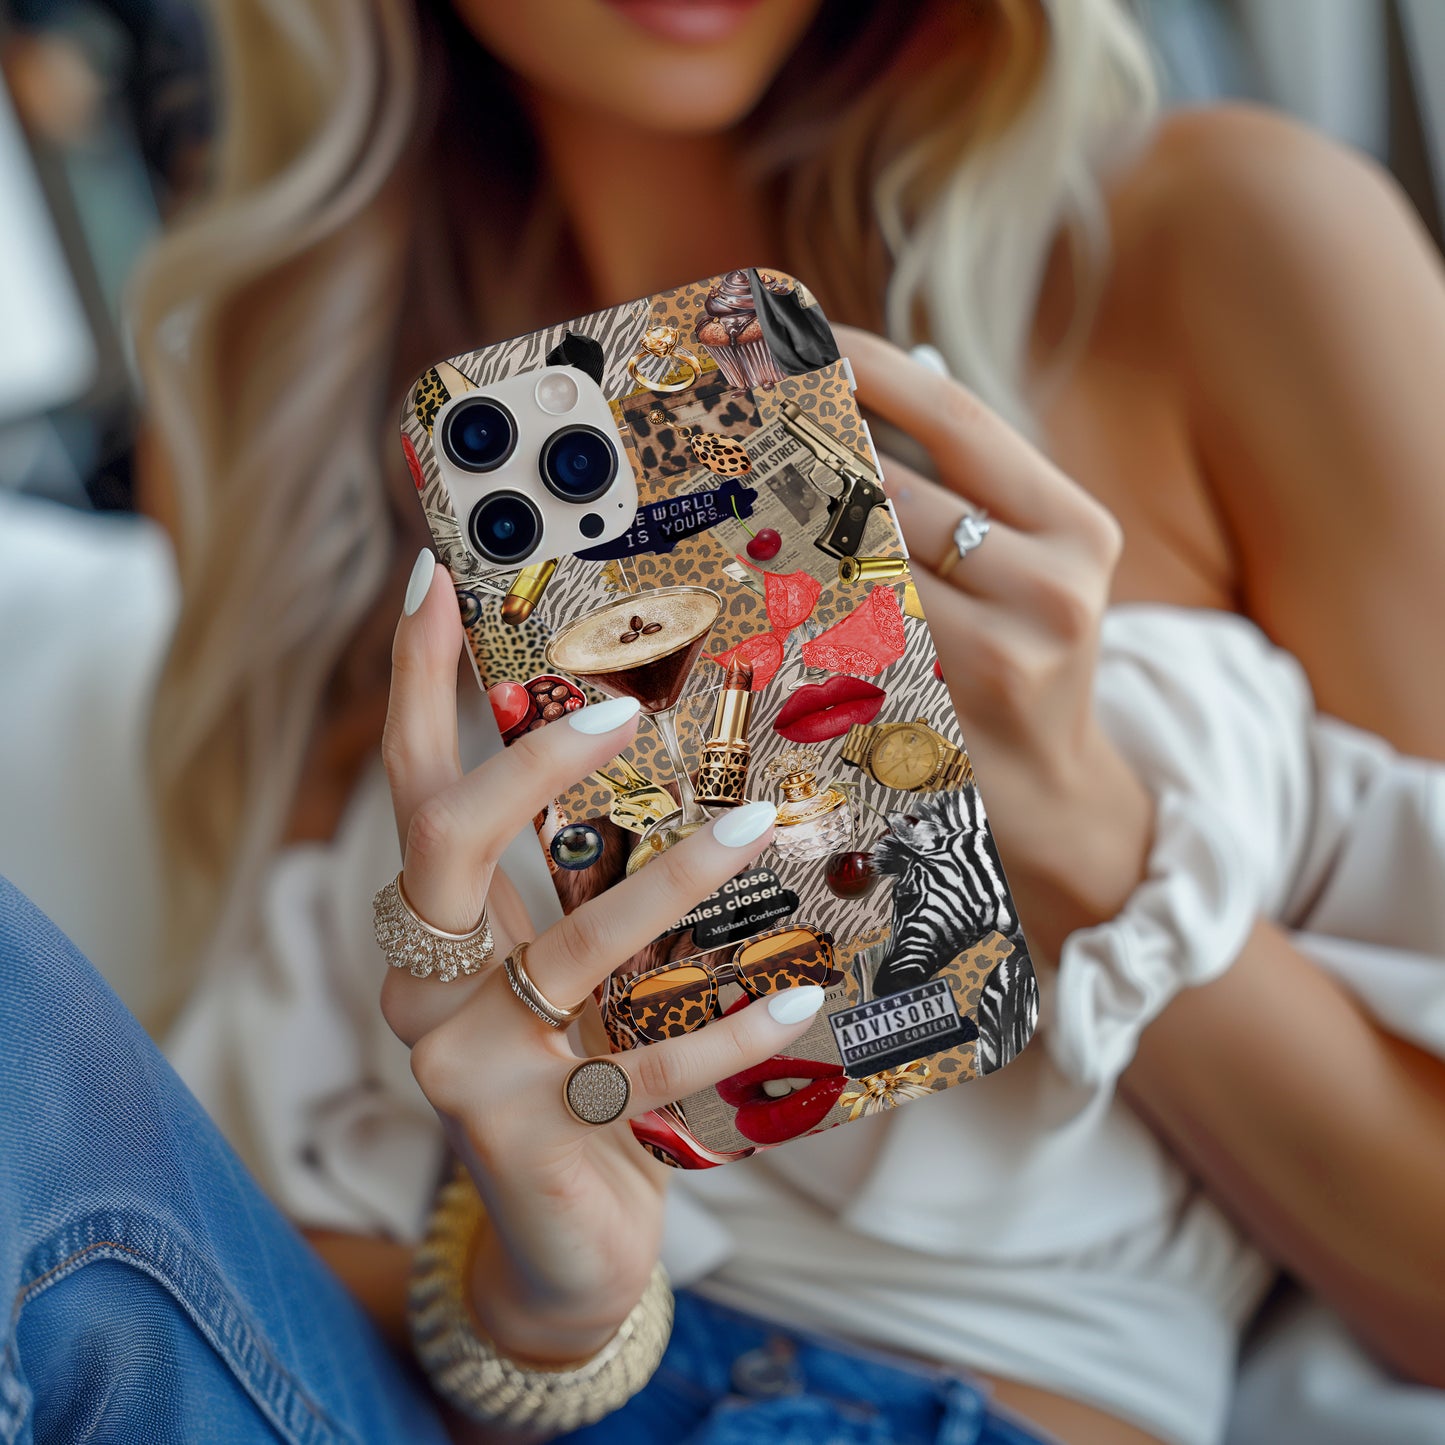 Girl Holding Mob Wife Aesthetic Scrapbook Collage Phone Case by Artscape Market